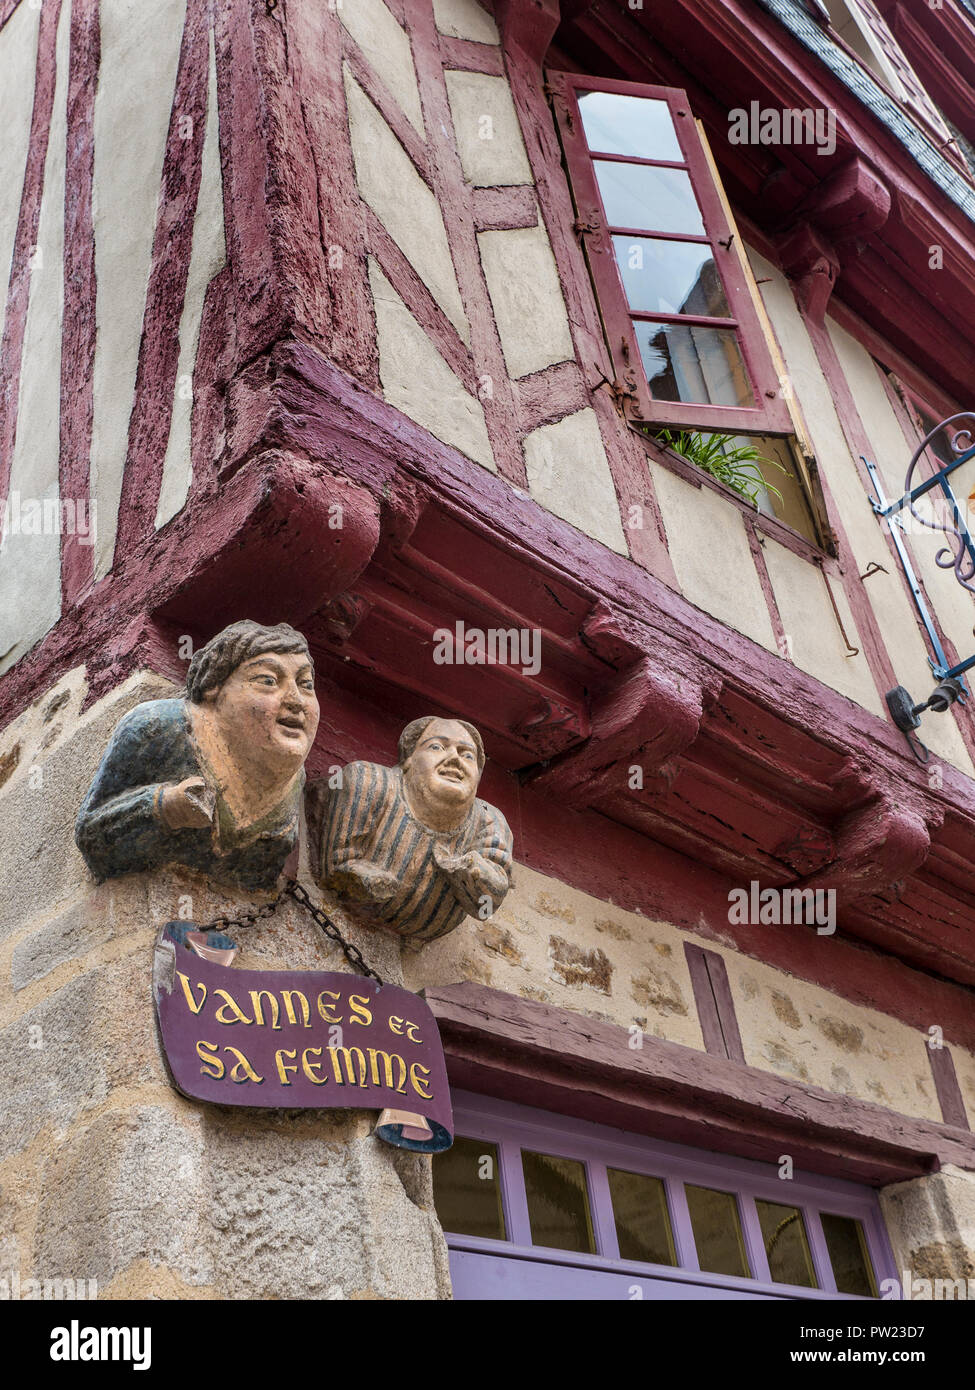 ‘Vannes et sa Femme’ statue (Vannes and his wife) a 16th Century polychrome stone panel on the facade of a half-timbered house Vannes Brittany France Stock Photo